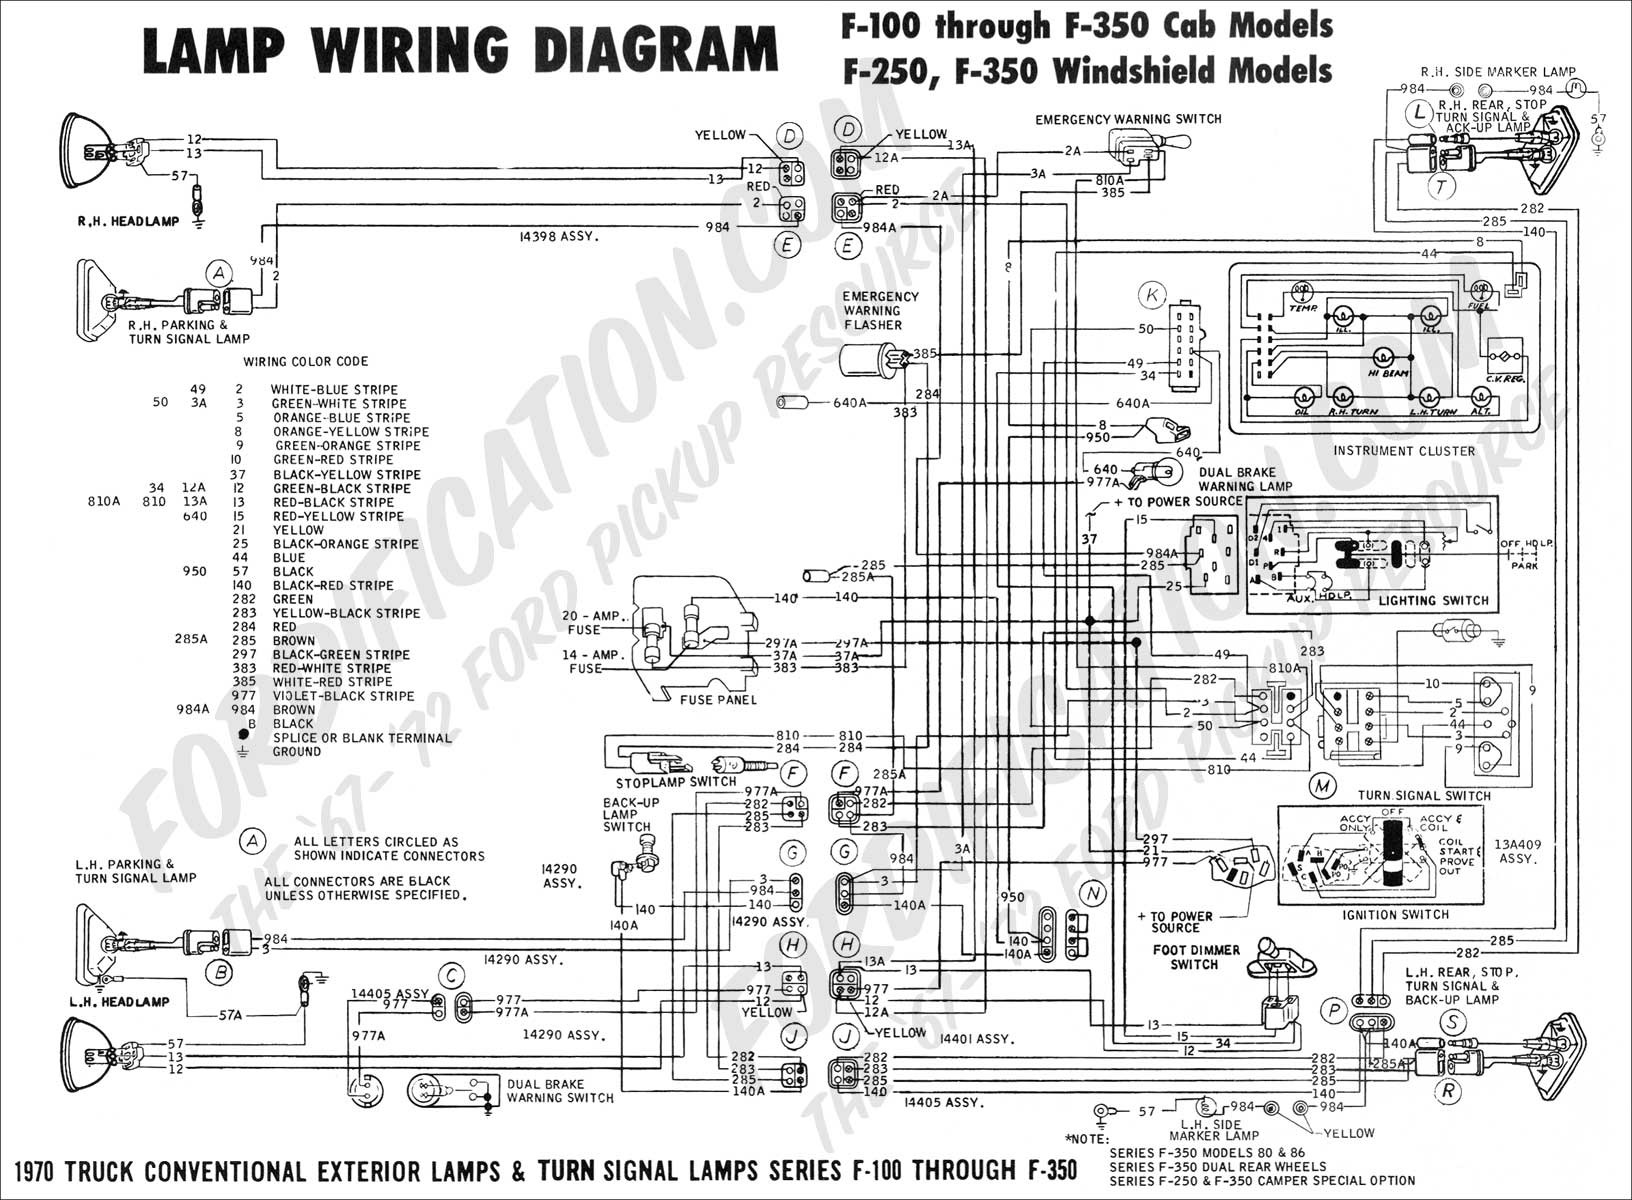 2000 Mustang Engine Diagram 1996 ford F 350 Wiring Wiring Info • Of 2000 Mustang Engine Diagram